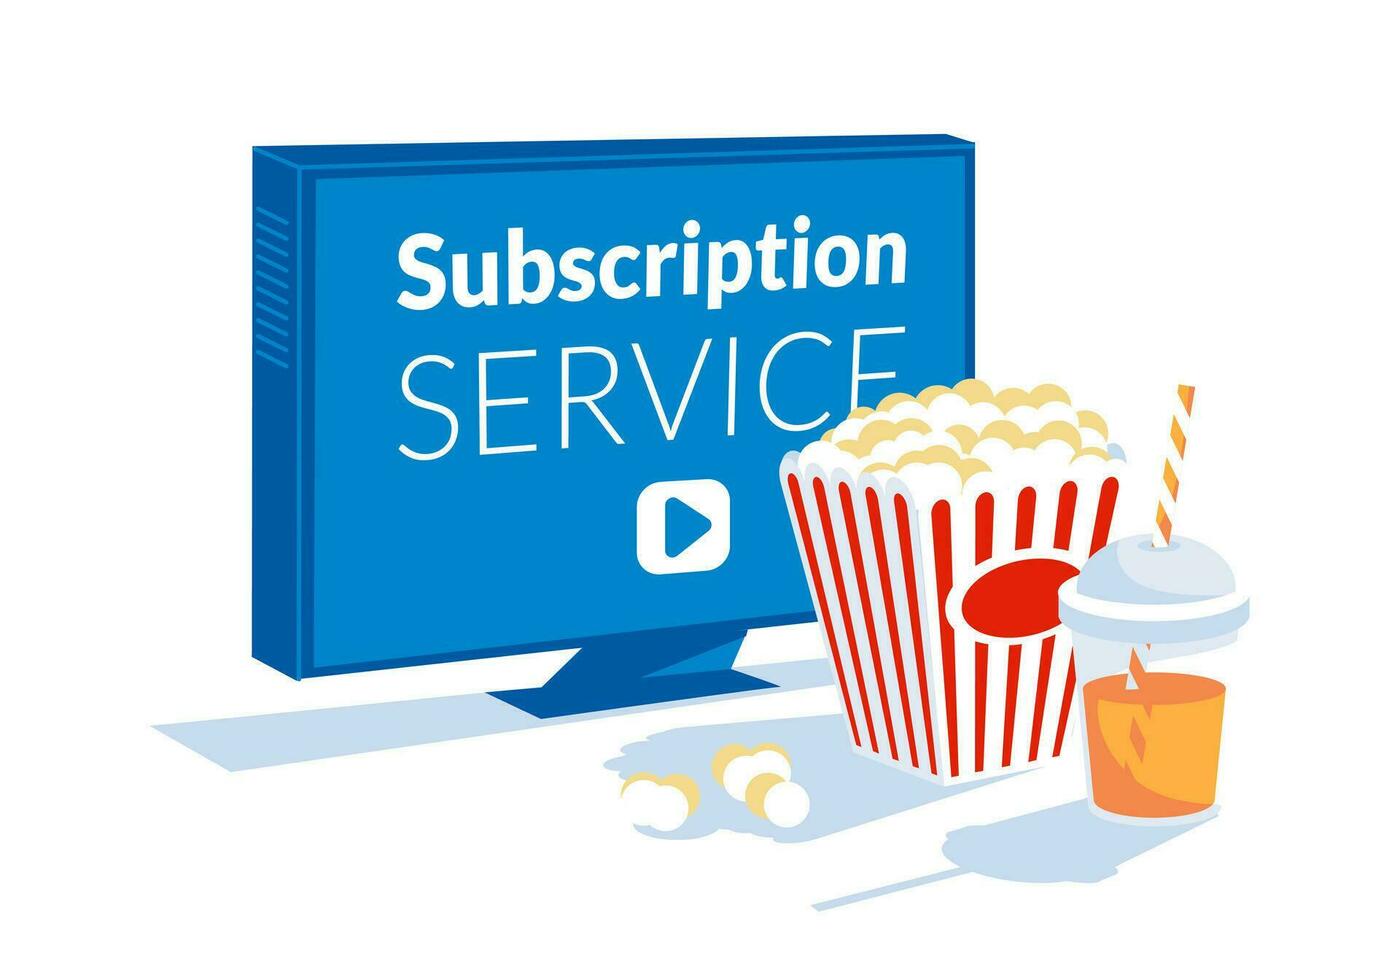 metaphor for media content subscription service. A large paper glass of popcorn and a glass of drink on the background of a large TV screen. Access to films and shows is open. vector